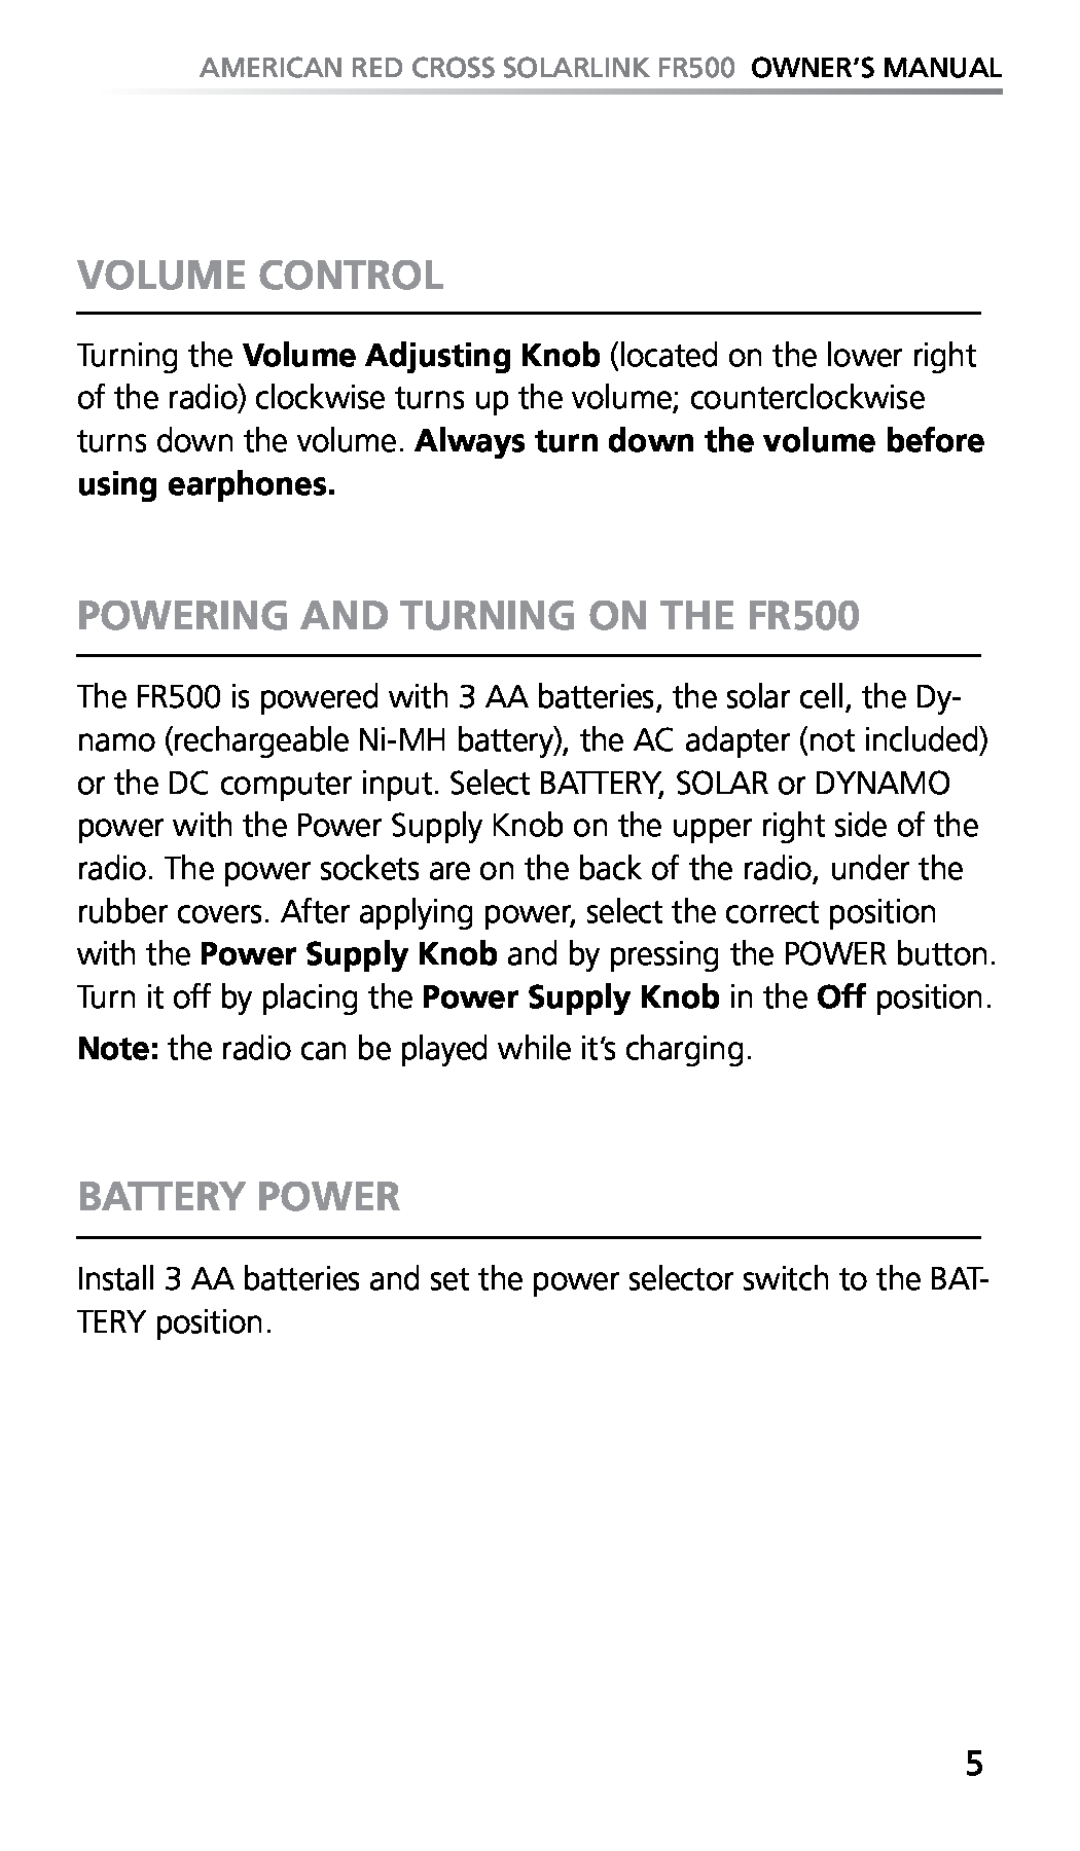 Eton owner manual Volume Control, POWERING AND TURNING ON THE FR500, Battery Power 